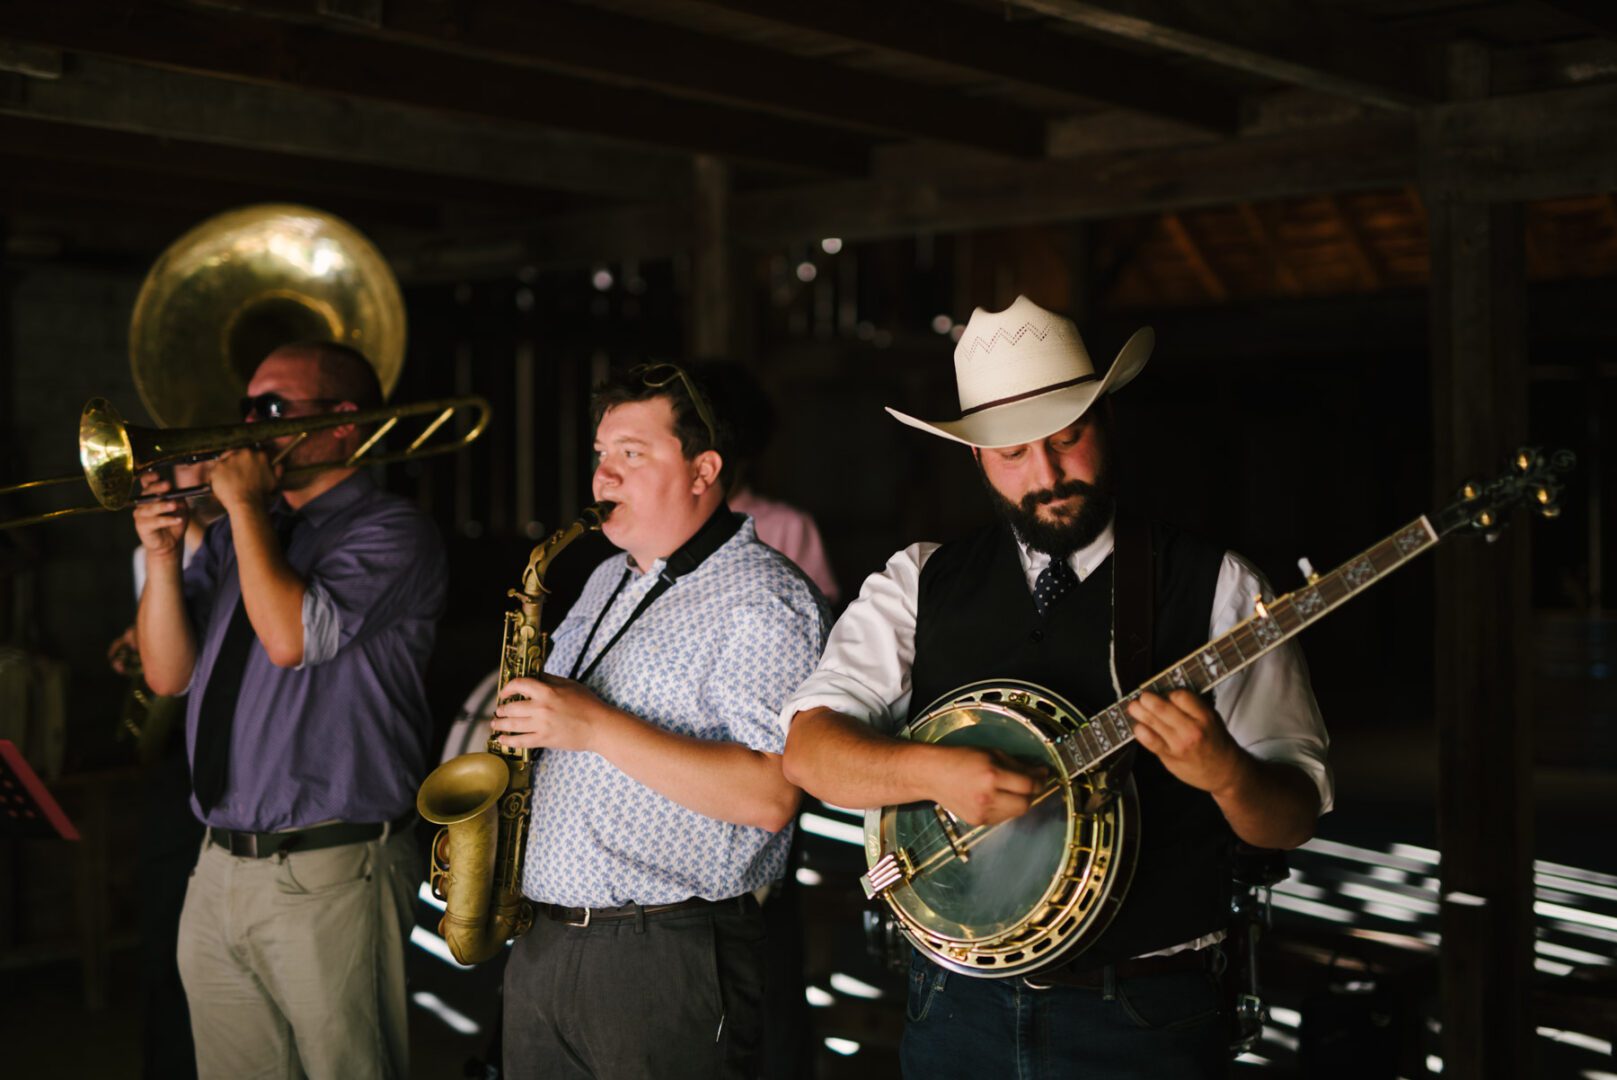 A group of men playing instruments in a barn.